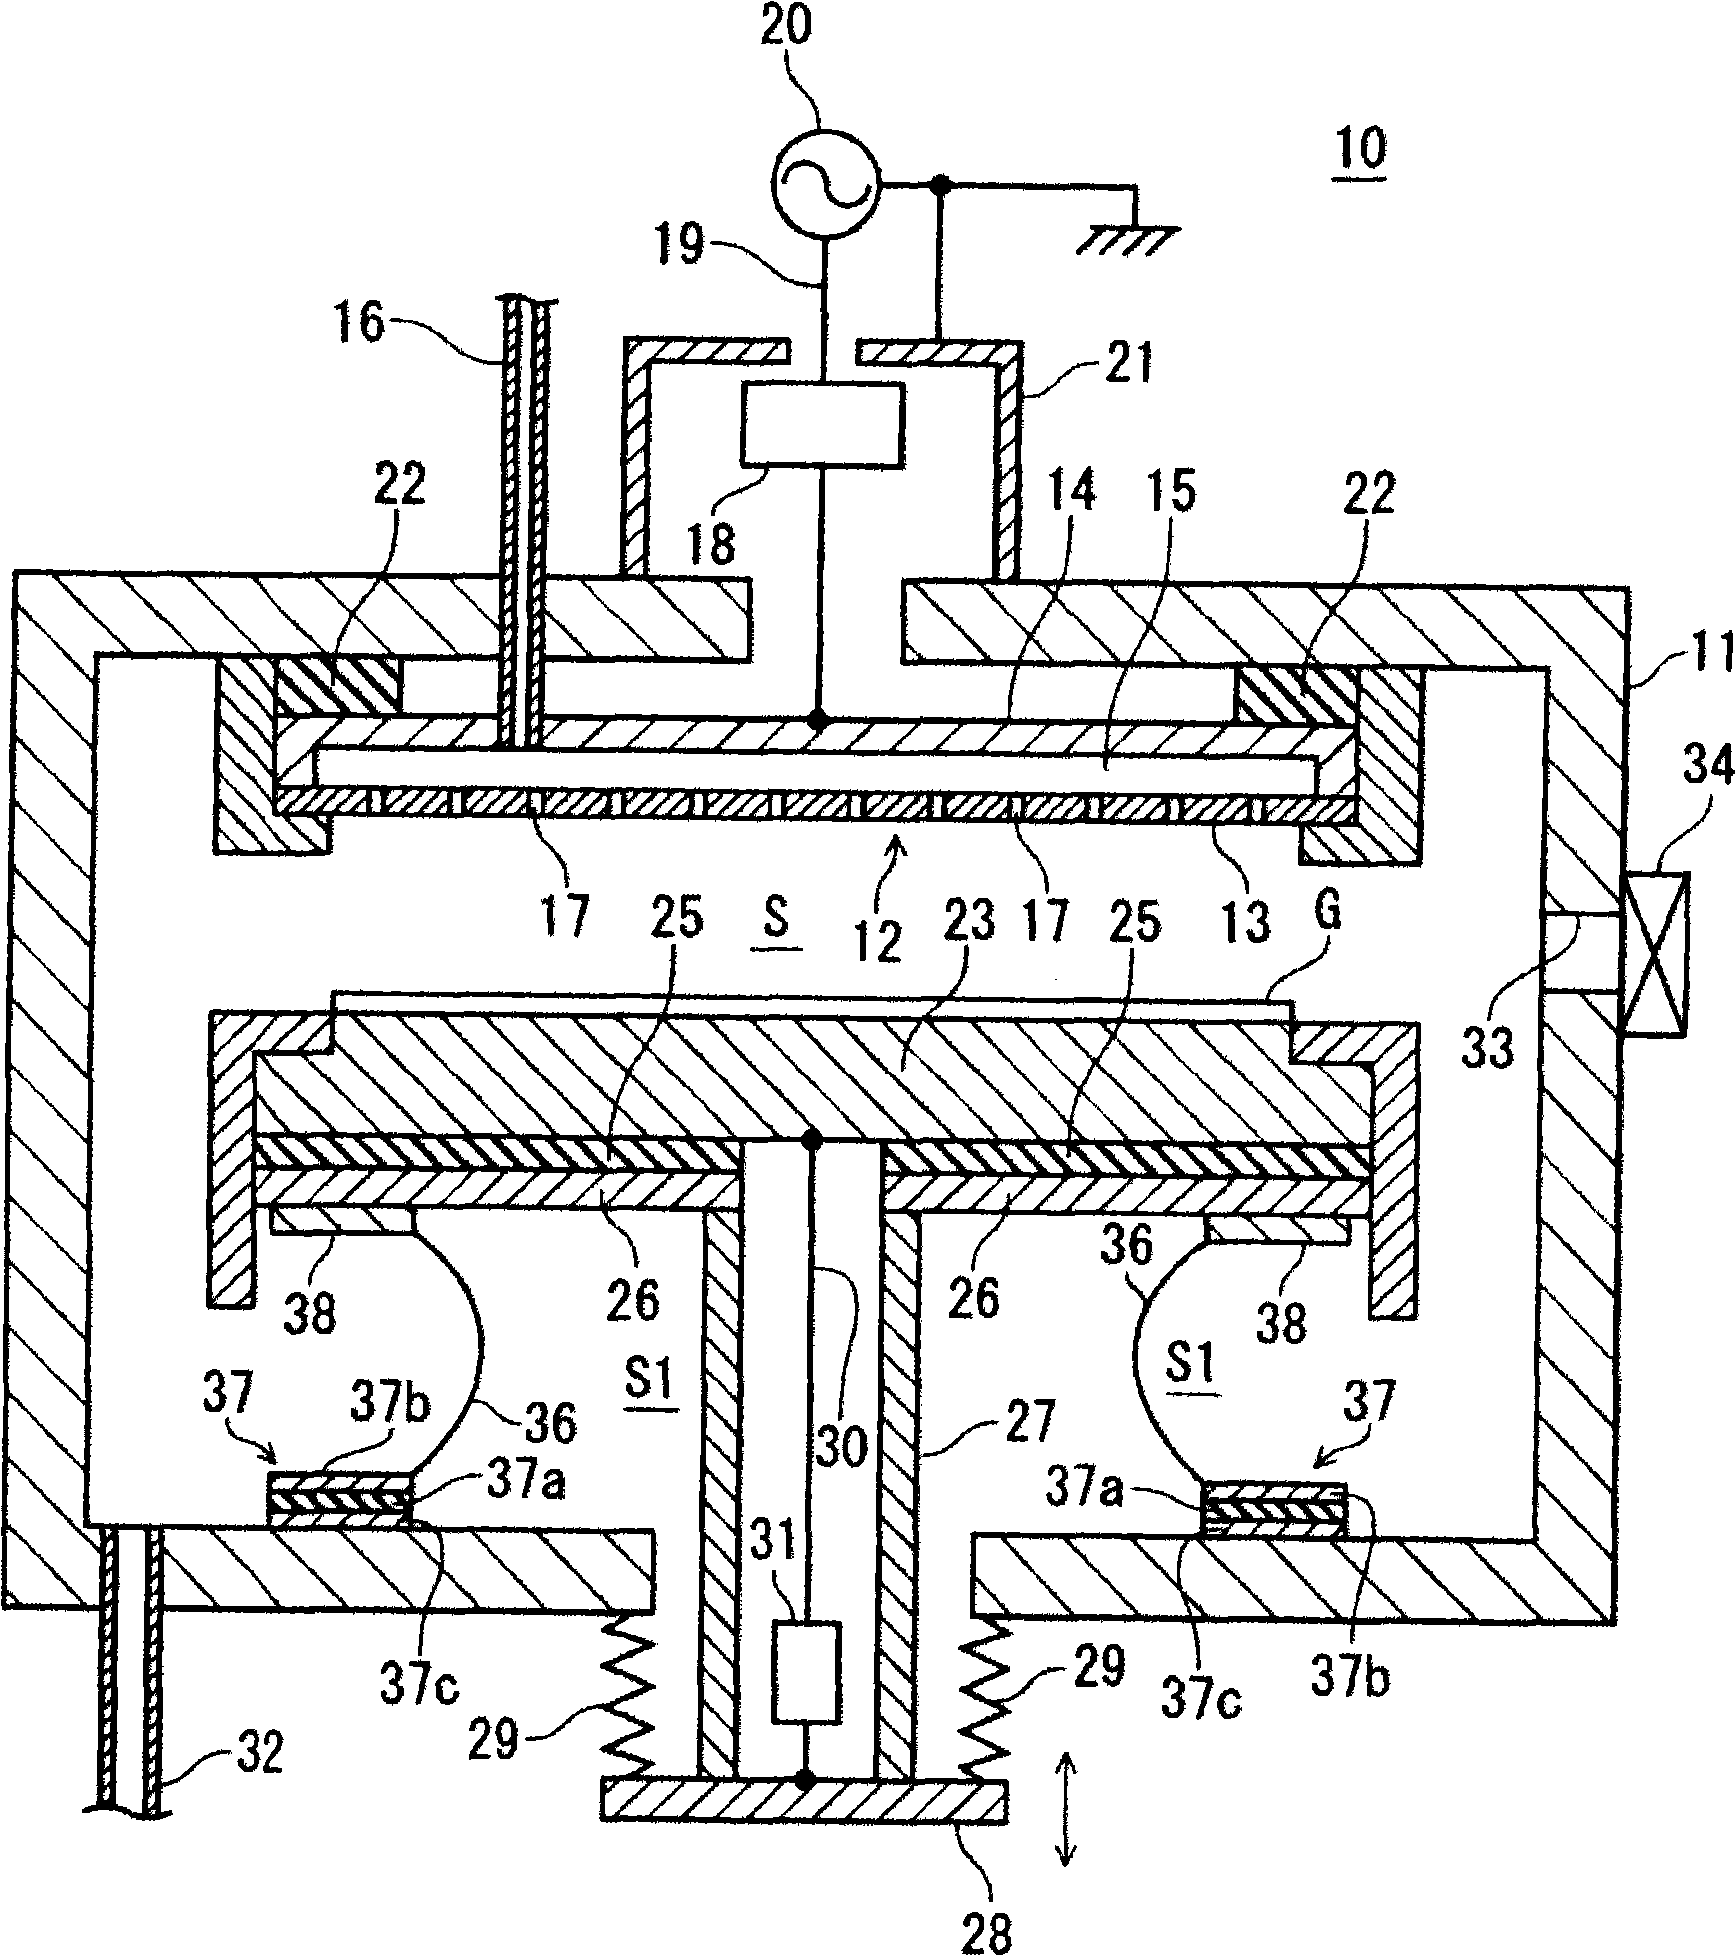 Plasma treatment apparatus and short circuit of high frequency current